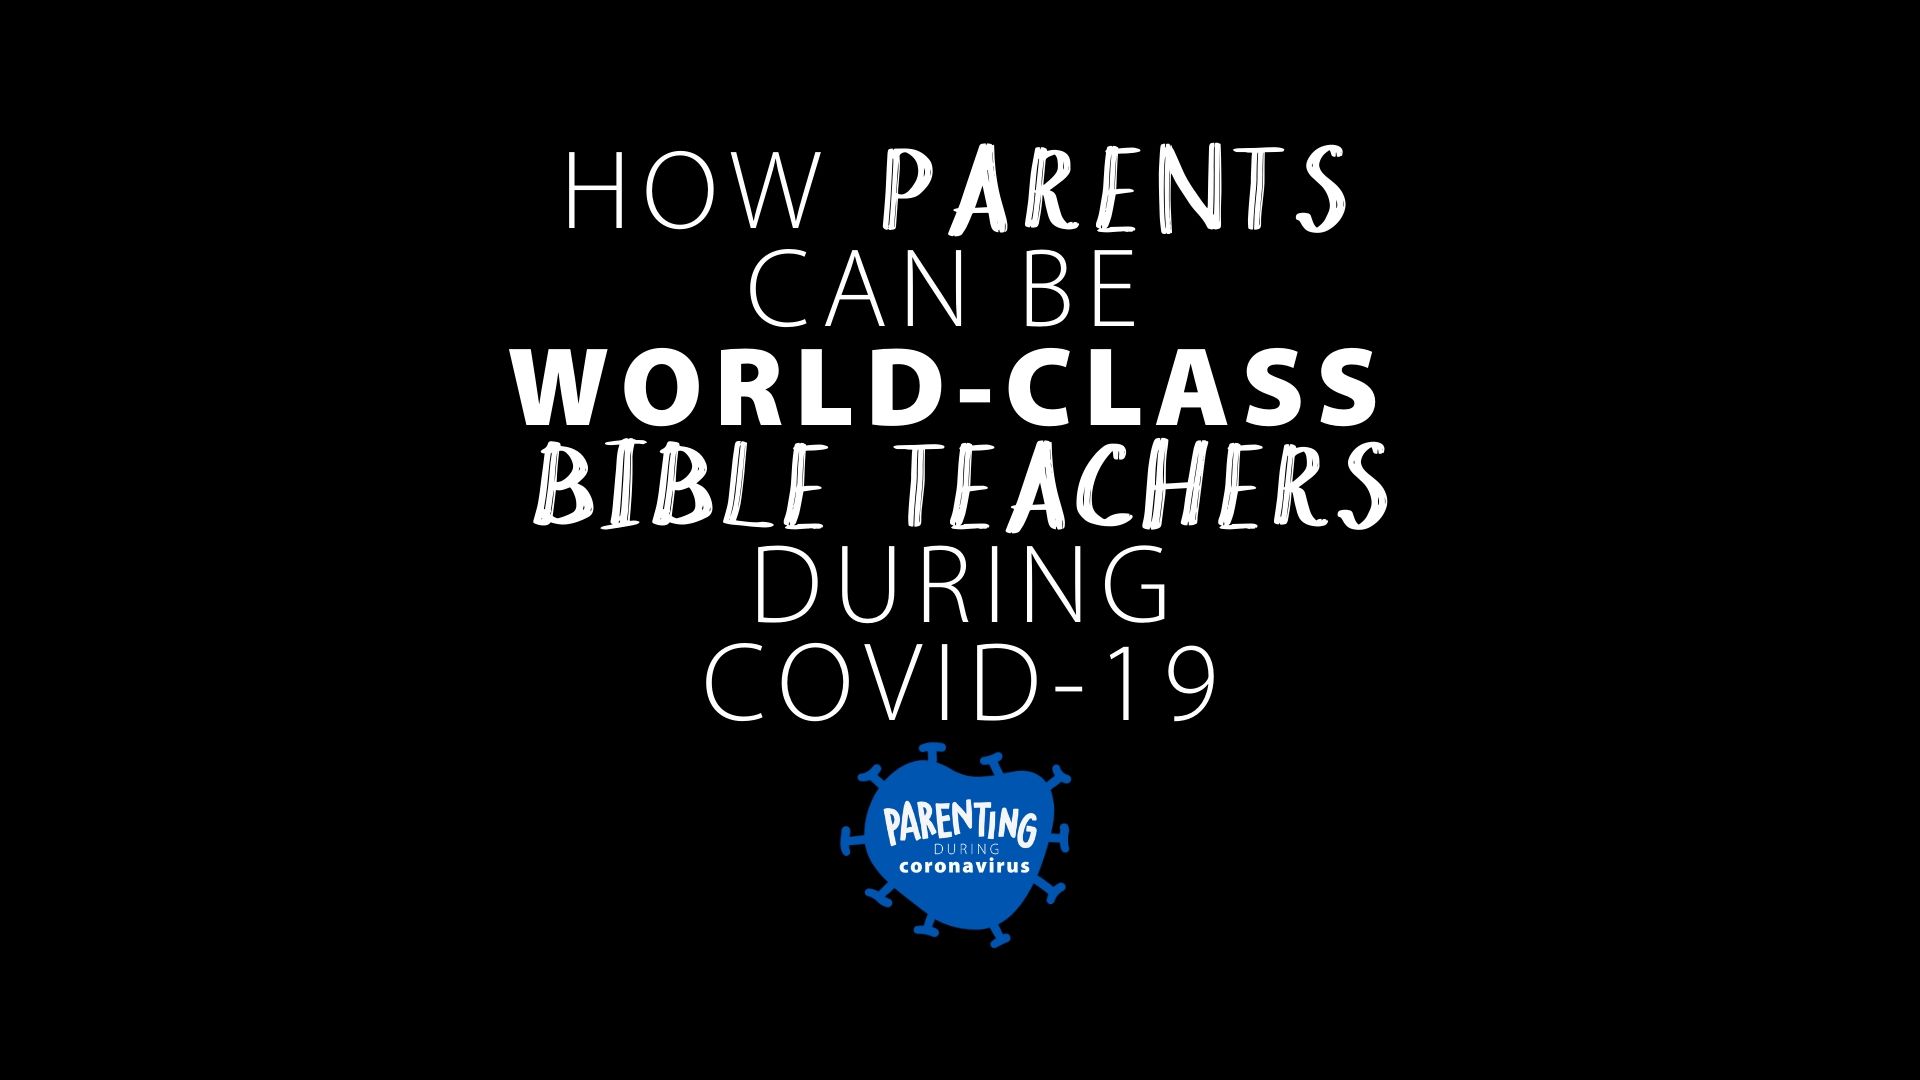 How Parents Can Be World-Class Bible Teachers During Covid-19